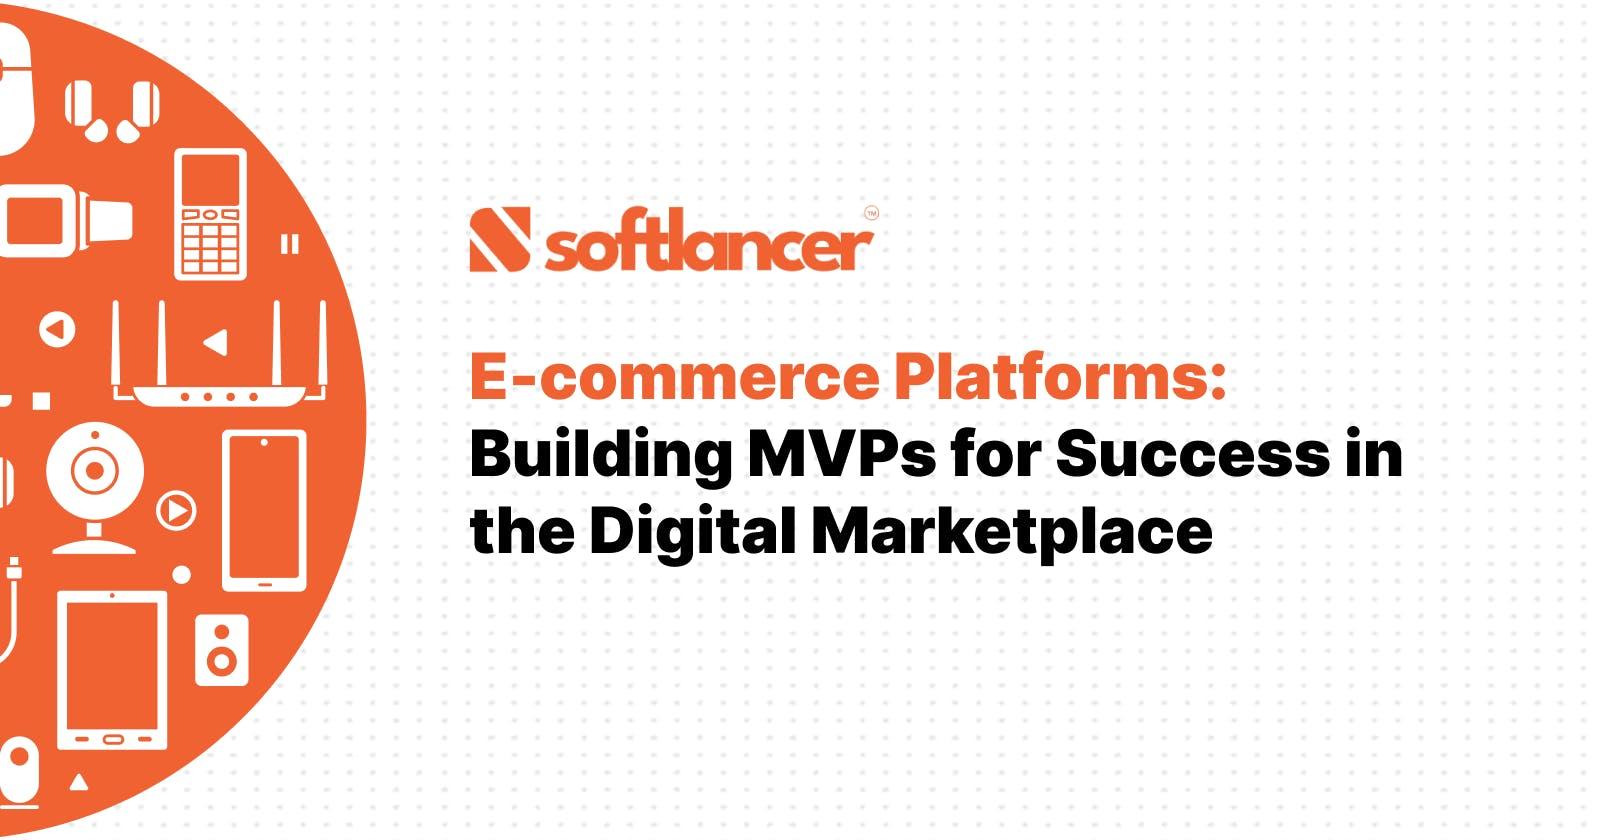 E-commerce Platforms: Building MVPs for Success in the Digital Marketplace